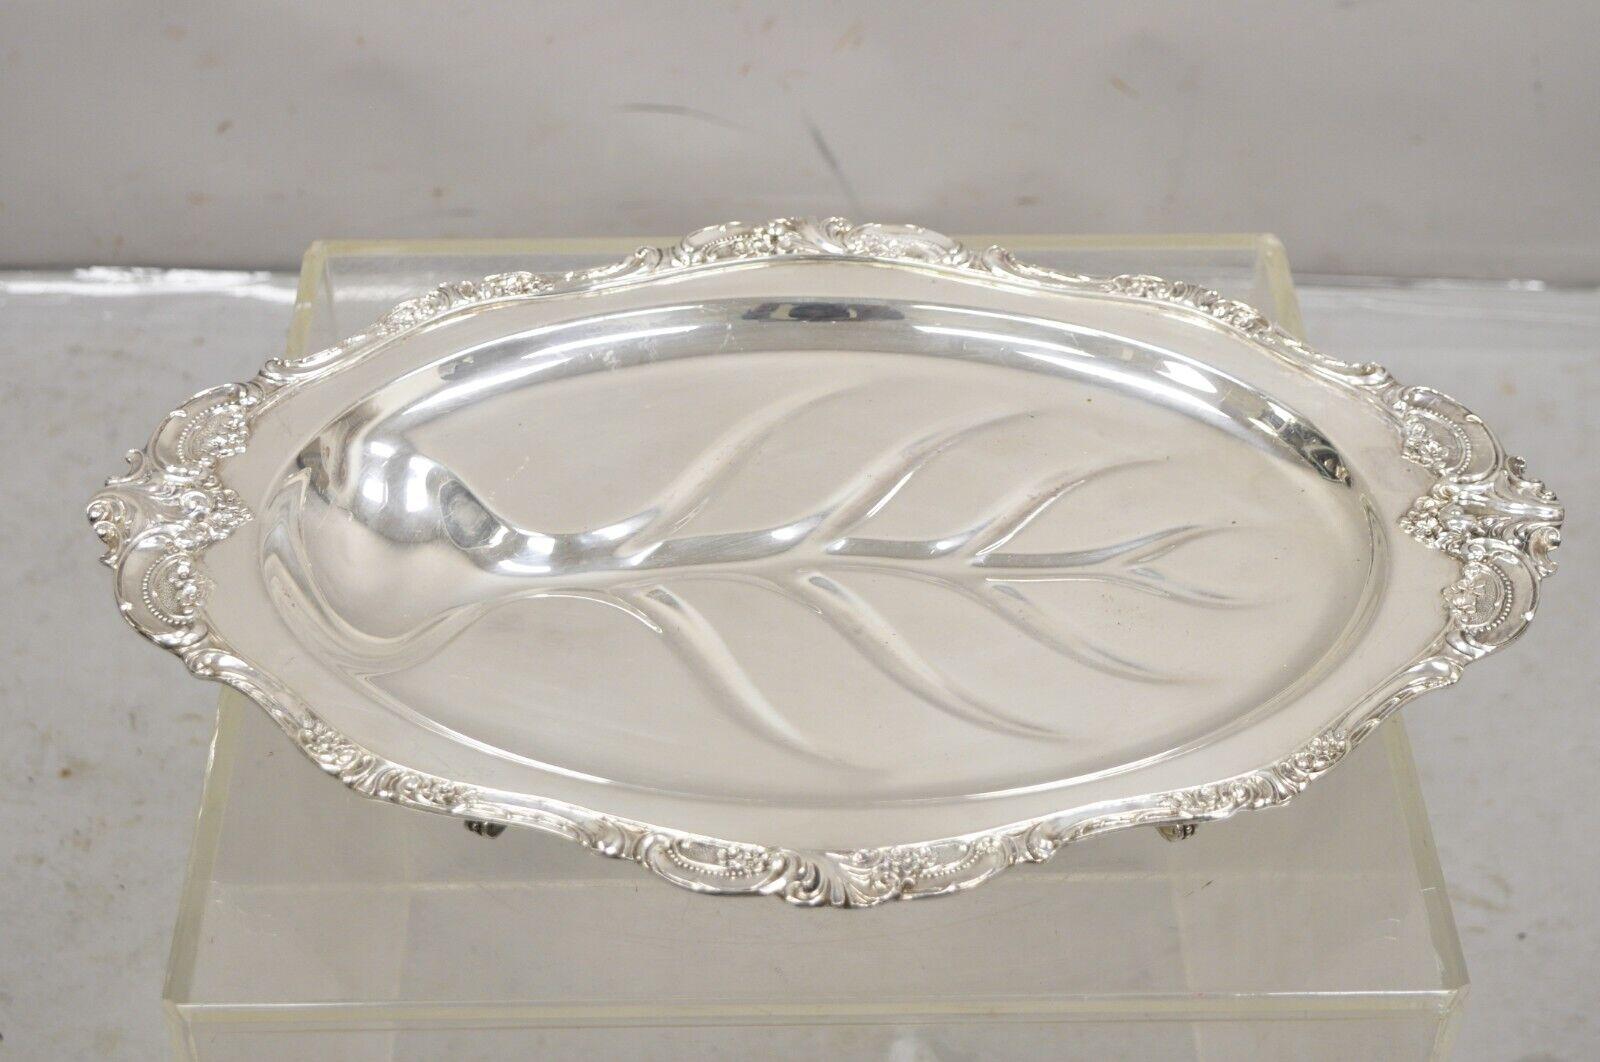 Baroque by Wallace 259 Silver Plated Meat Cutlery Serving Platter Tray. Circa  Mid 20th Century. Measurements:  2.25